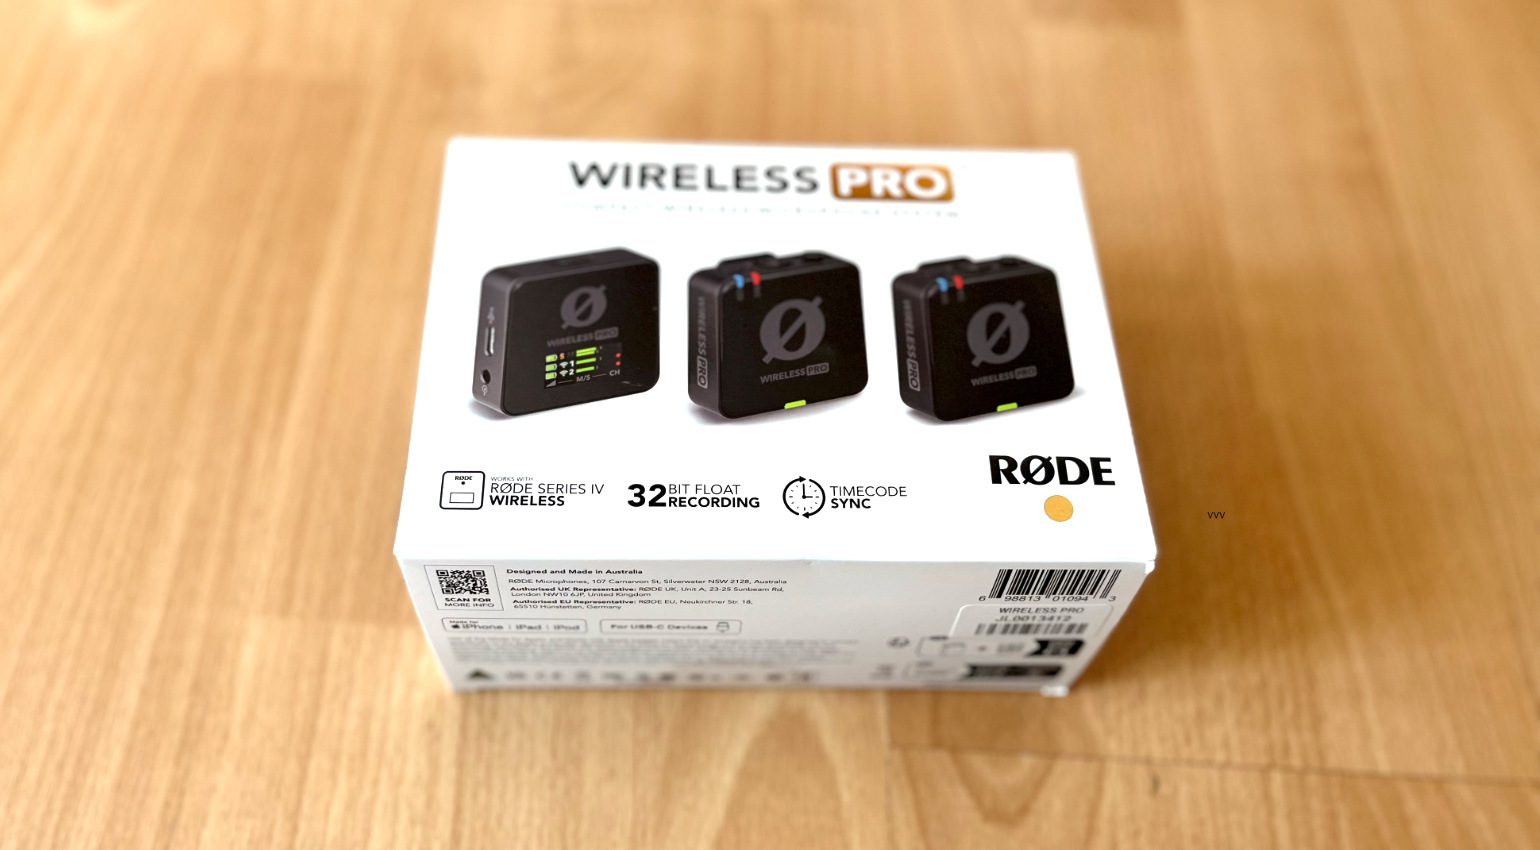 Rode Wireless Pro Mic System Unboxing So Many Extras! 